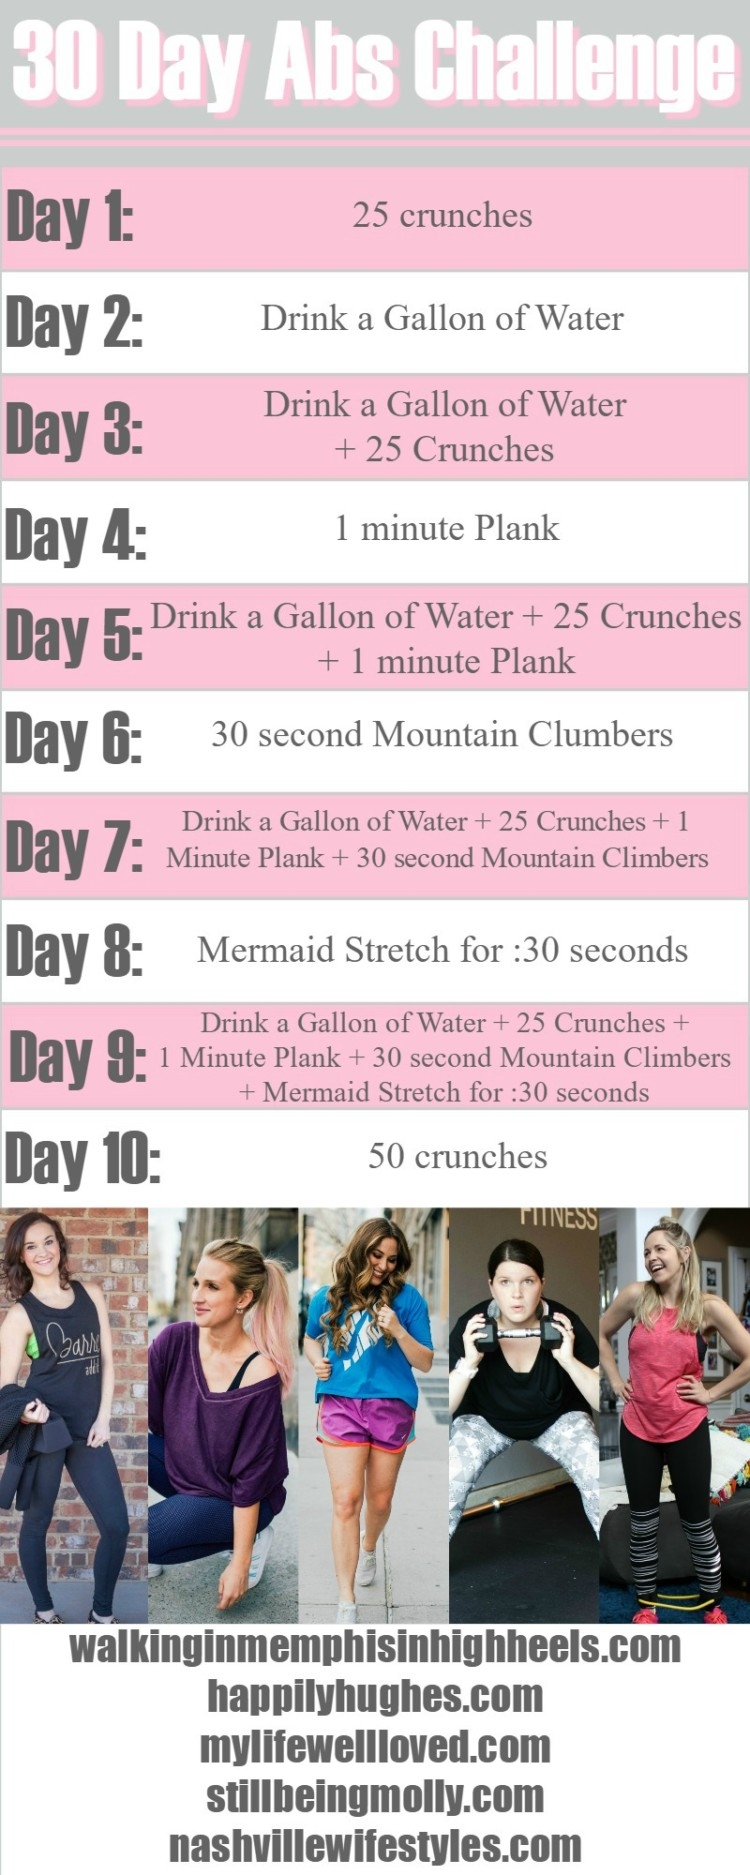 30 Day Ab Challenge from Heather of MyLifeWellLoved.com // The Bachelor and The Bachelorette Workout Game // Ab Workout